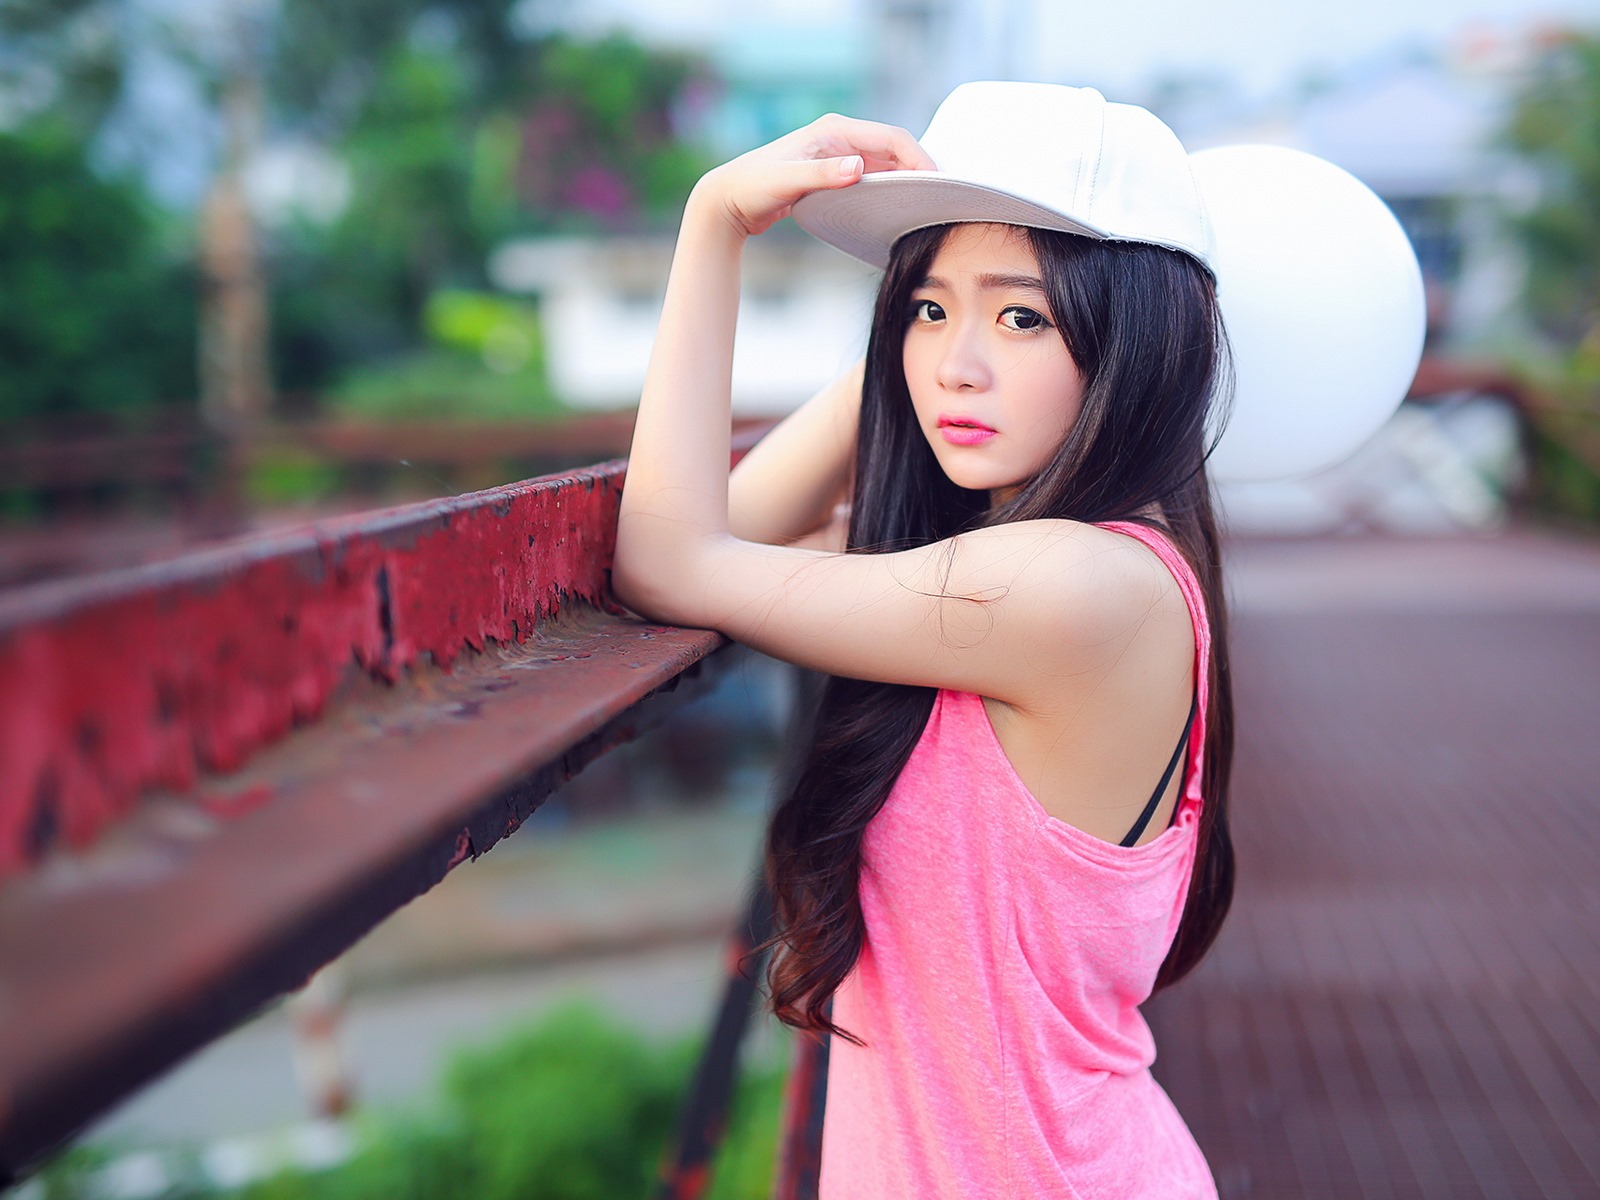 Pure and lovely young Asian girl HD wallpapers collection (1) #3 - 1600x1200